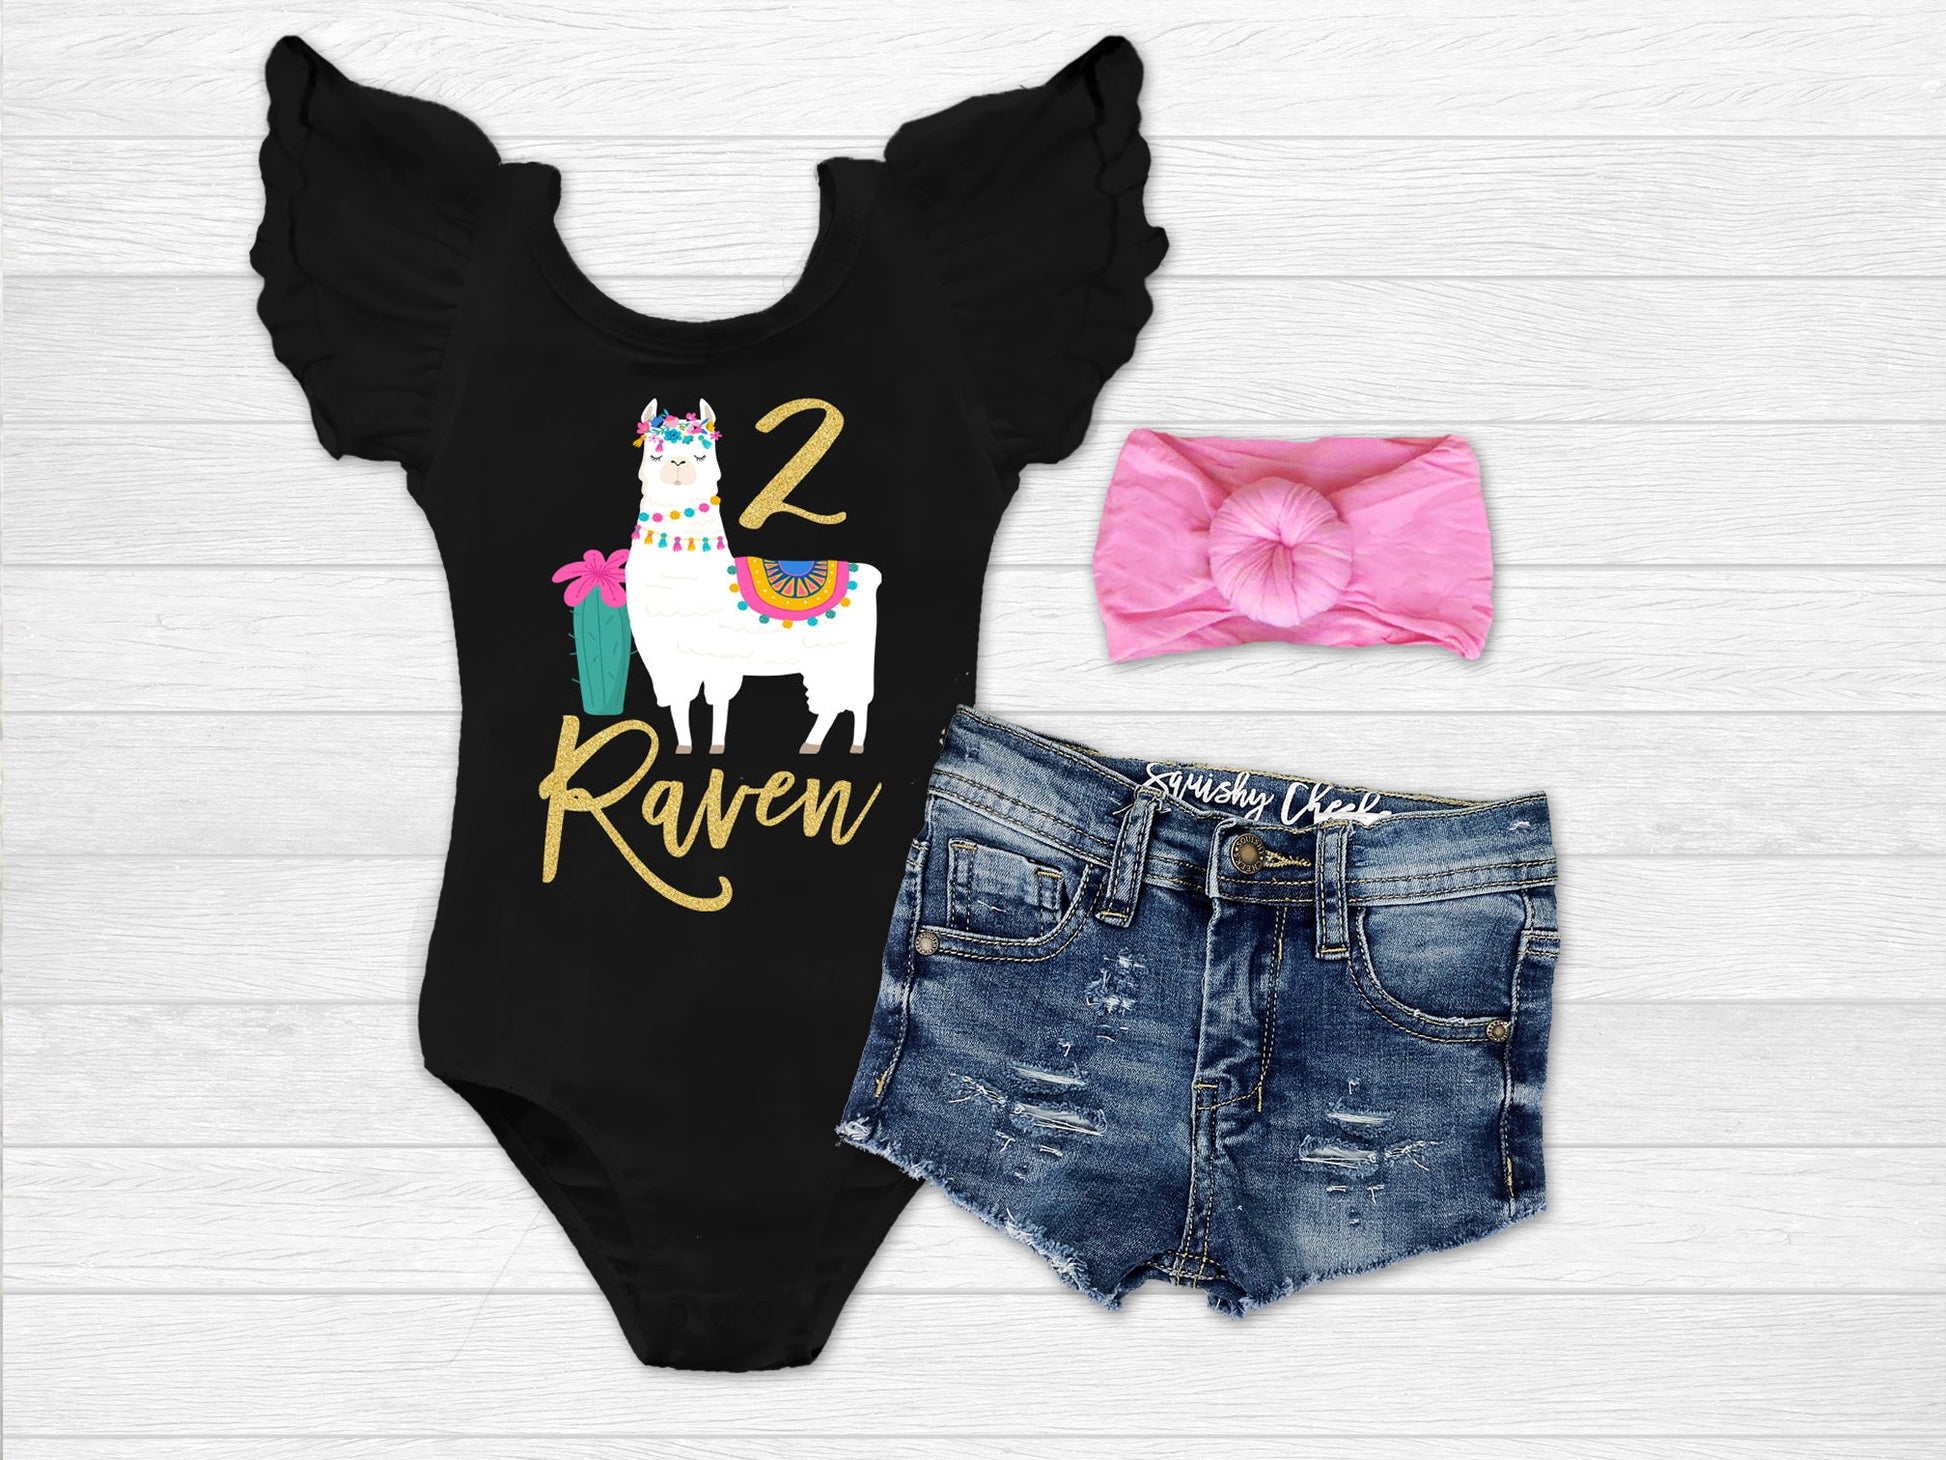 Girl's Personalized Llama Birthday Outfit - Squishy Cheeks